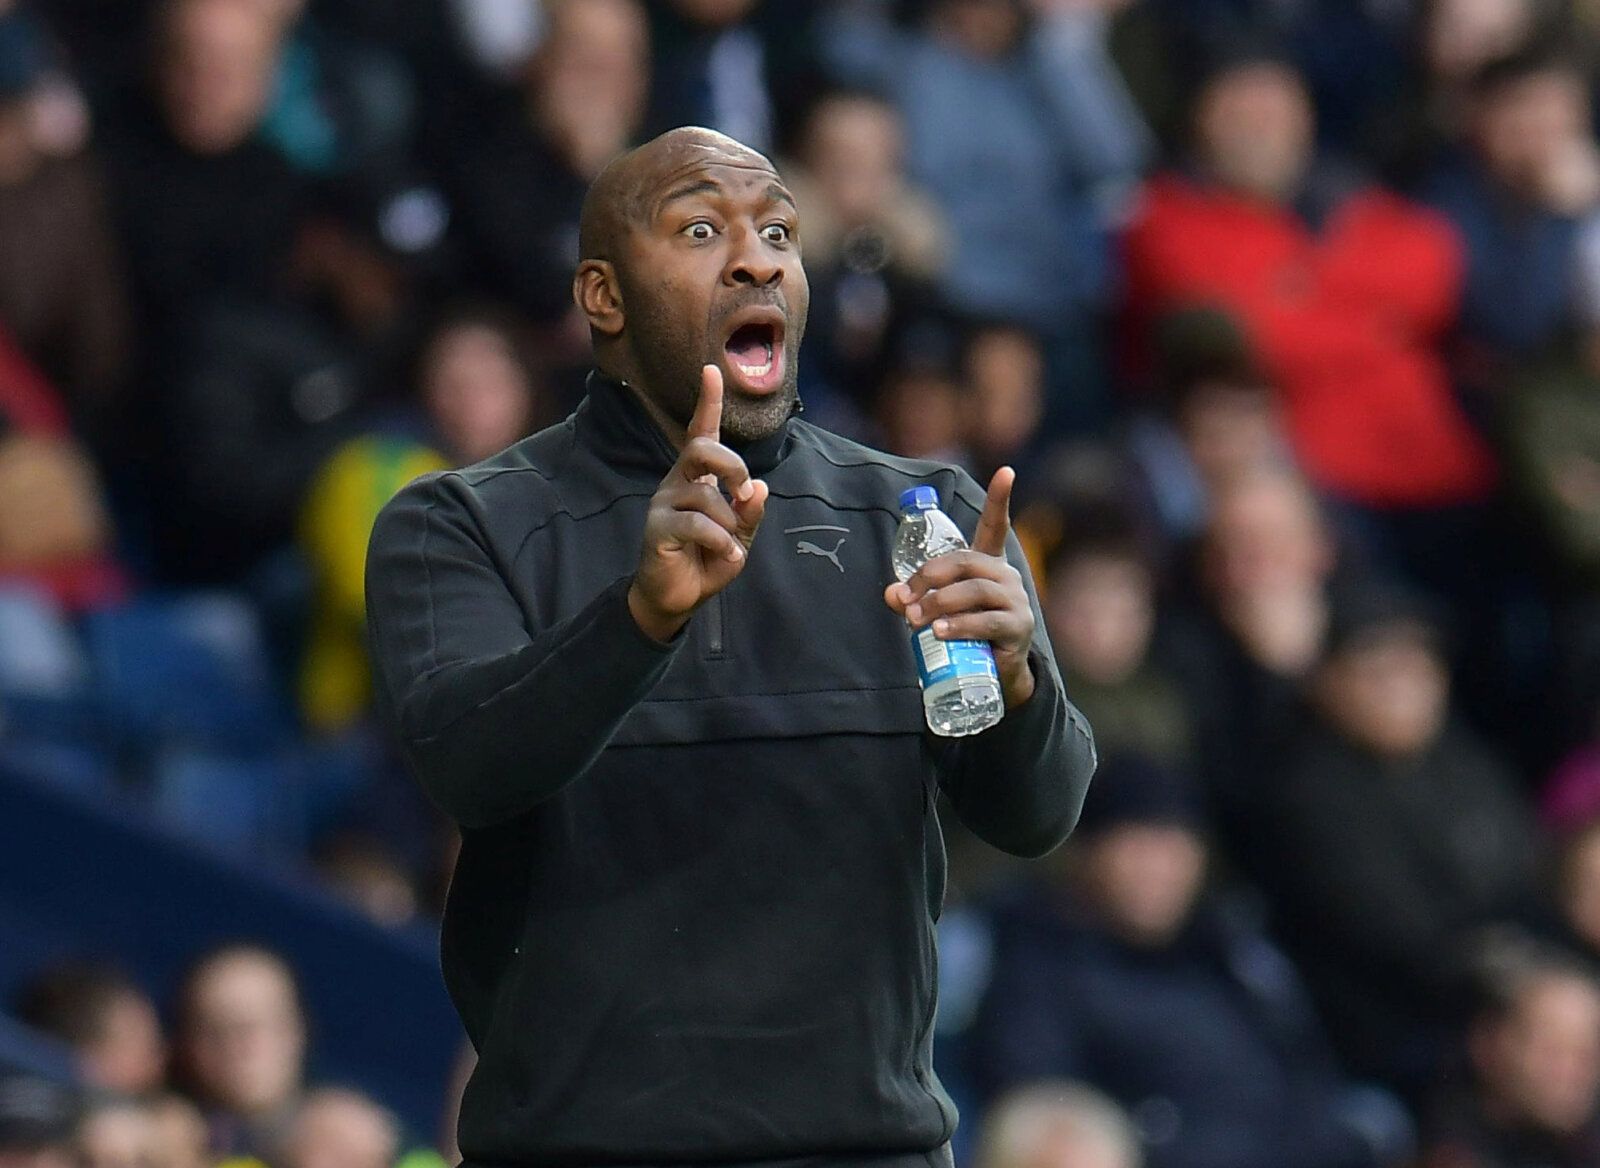 Soccer Football - Championship - West Bromwich Albion v Ipswich Town - The Hawthorns, West Bromwich, Britain - March 9, 2019   West Brom manager Darren Moore gives instructions during the match    Action Images/Paul Burrows    EDITORIAL USE ONLY. No use with unauthorized audio, video, data, fixture lists, club/league logos or 